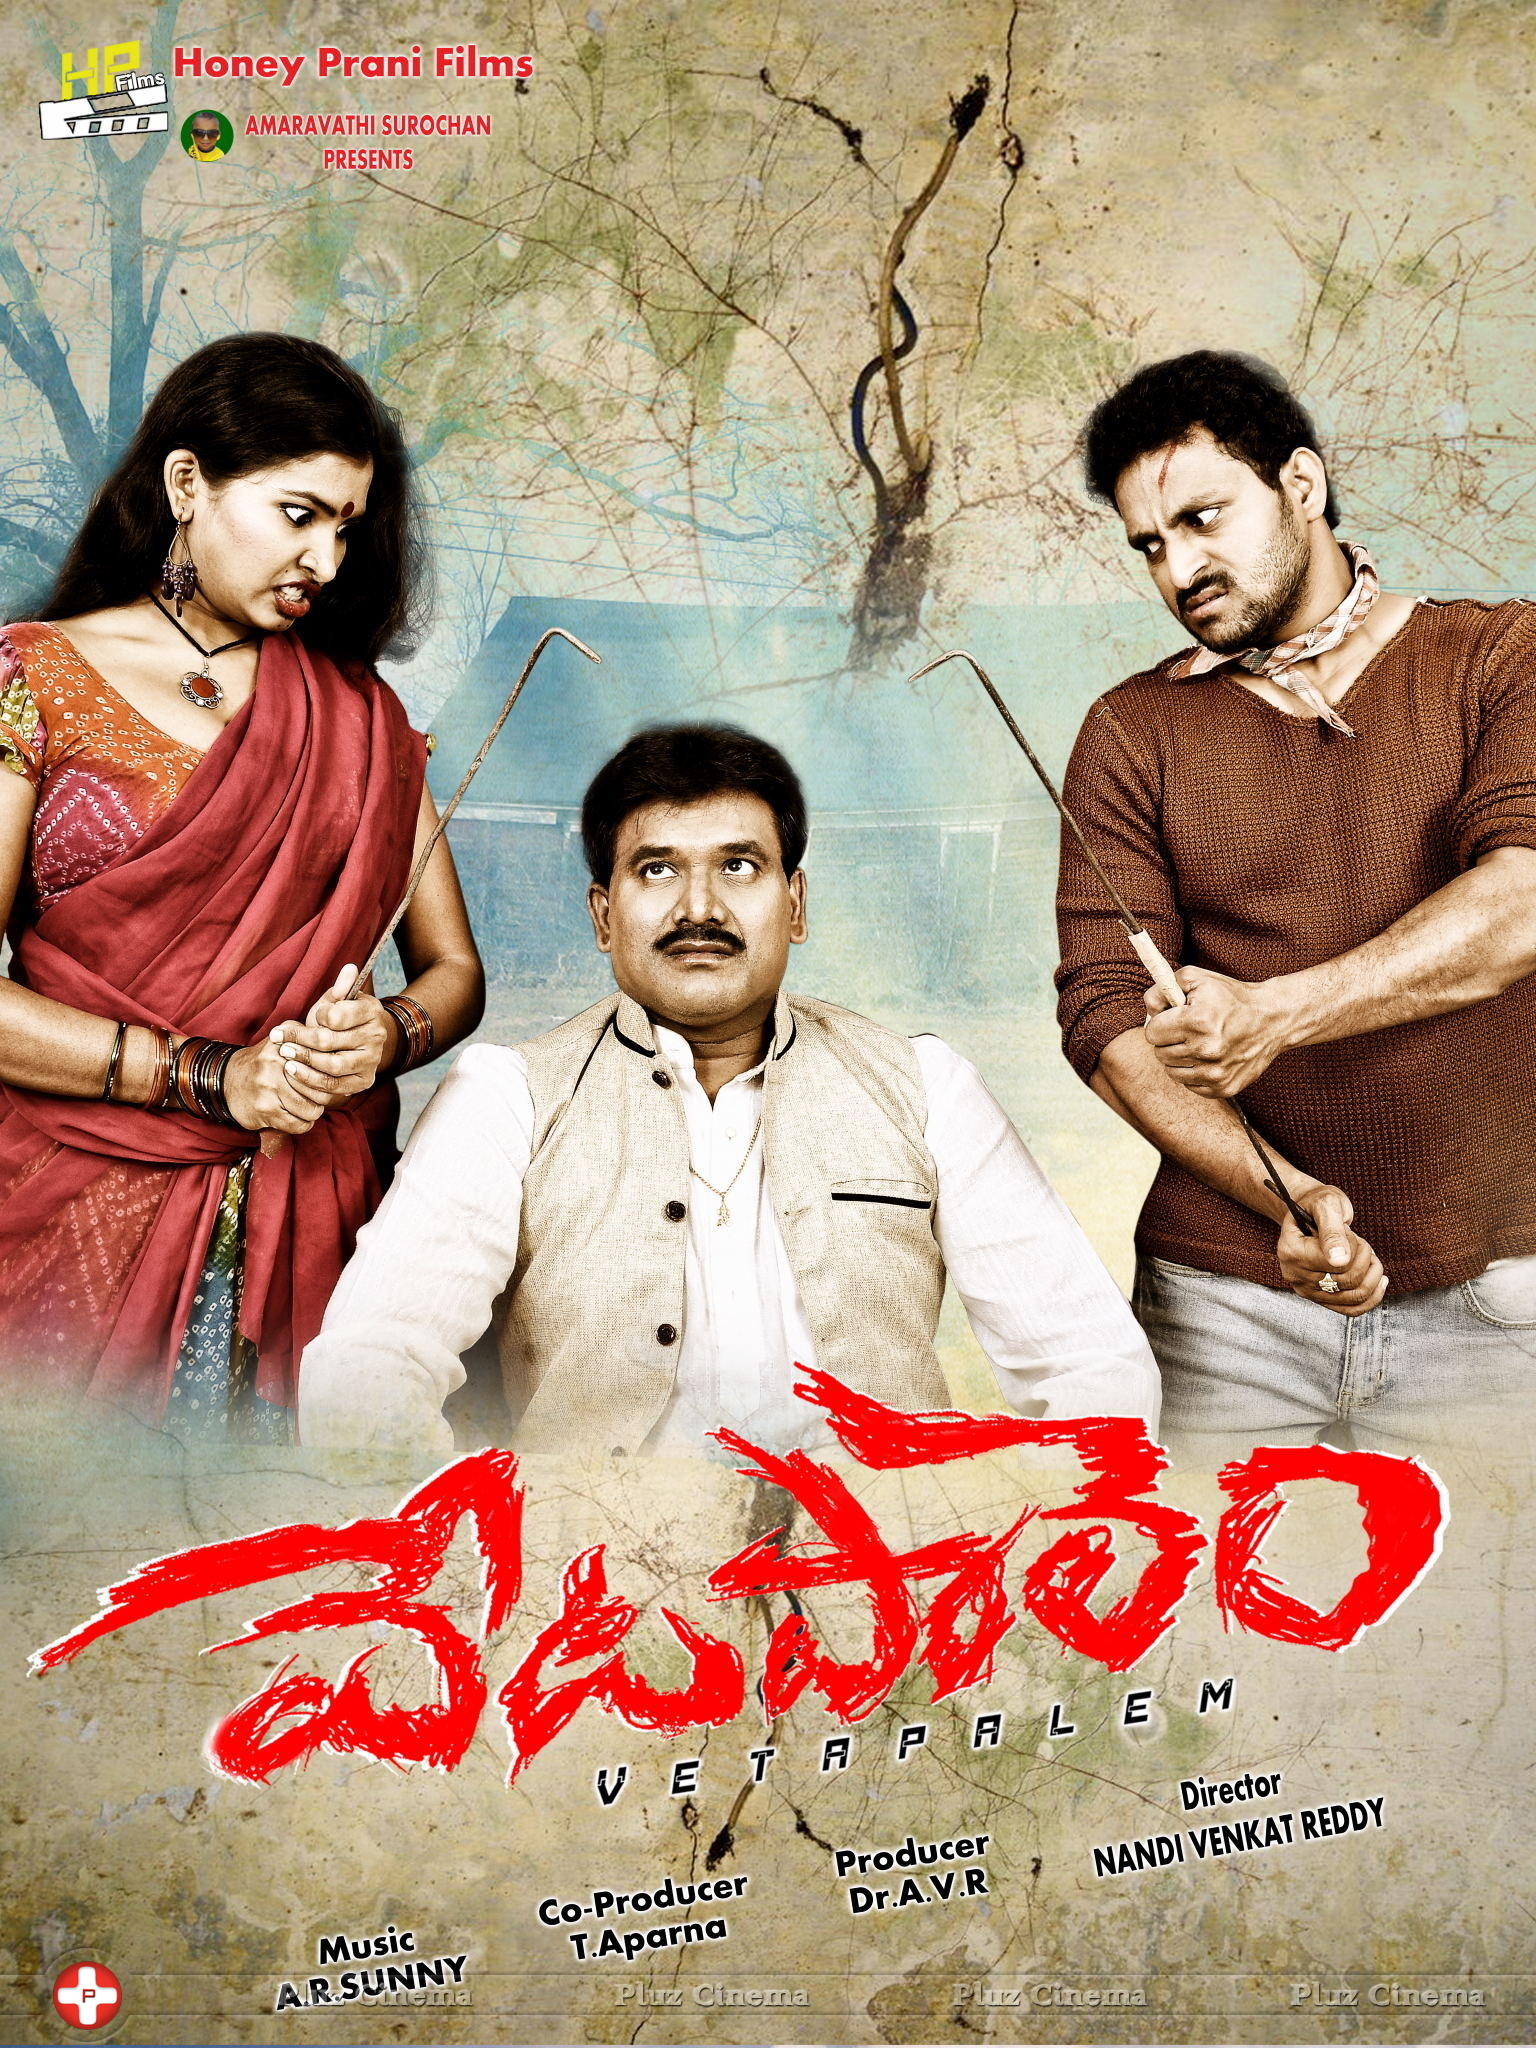 Vetapalem Movie Wallpapers | Picture 1175840